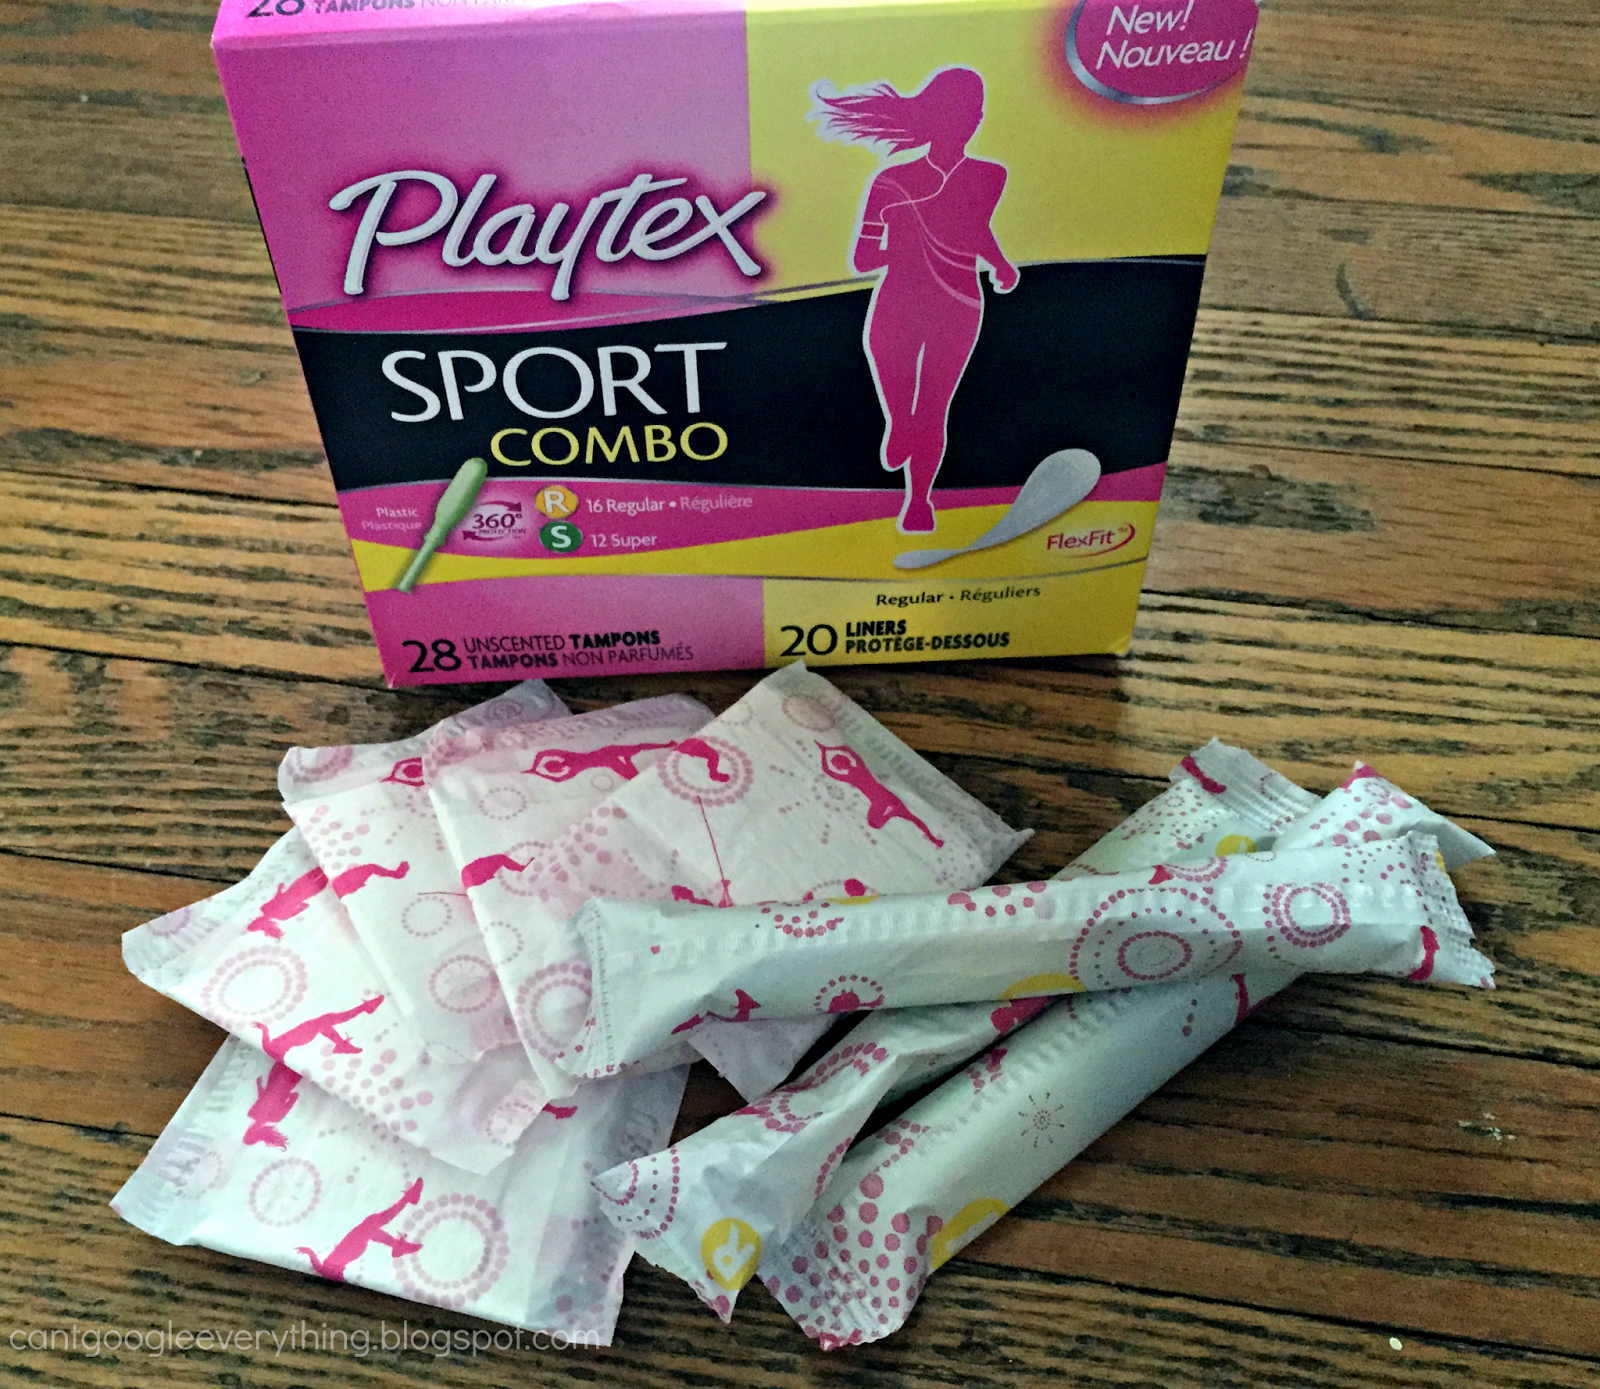 Get a FREE Sample of Playtex Sport Pads, Liners, and Combo Packs!